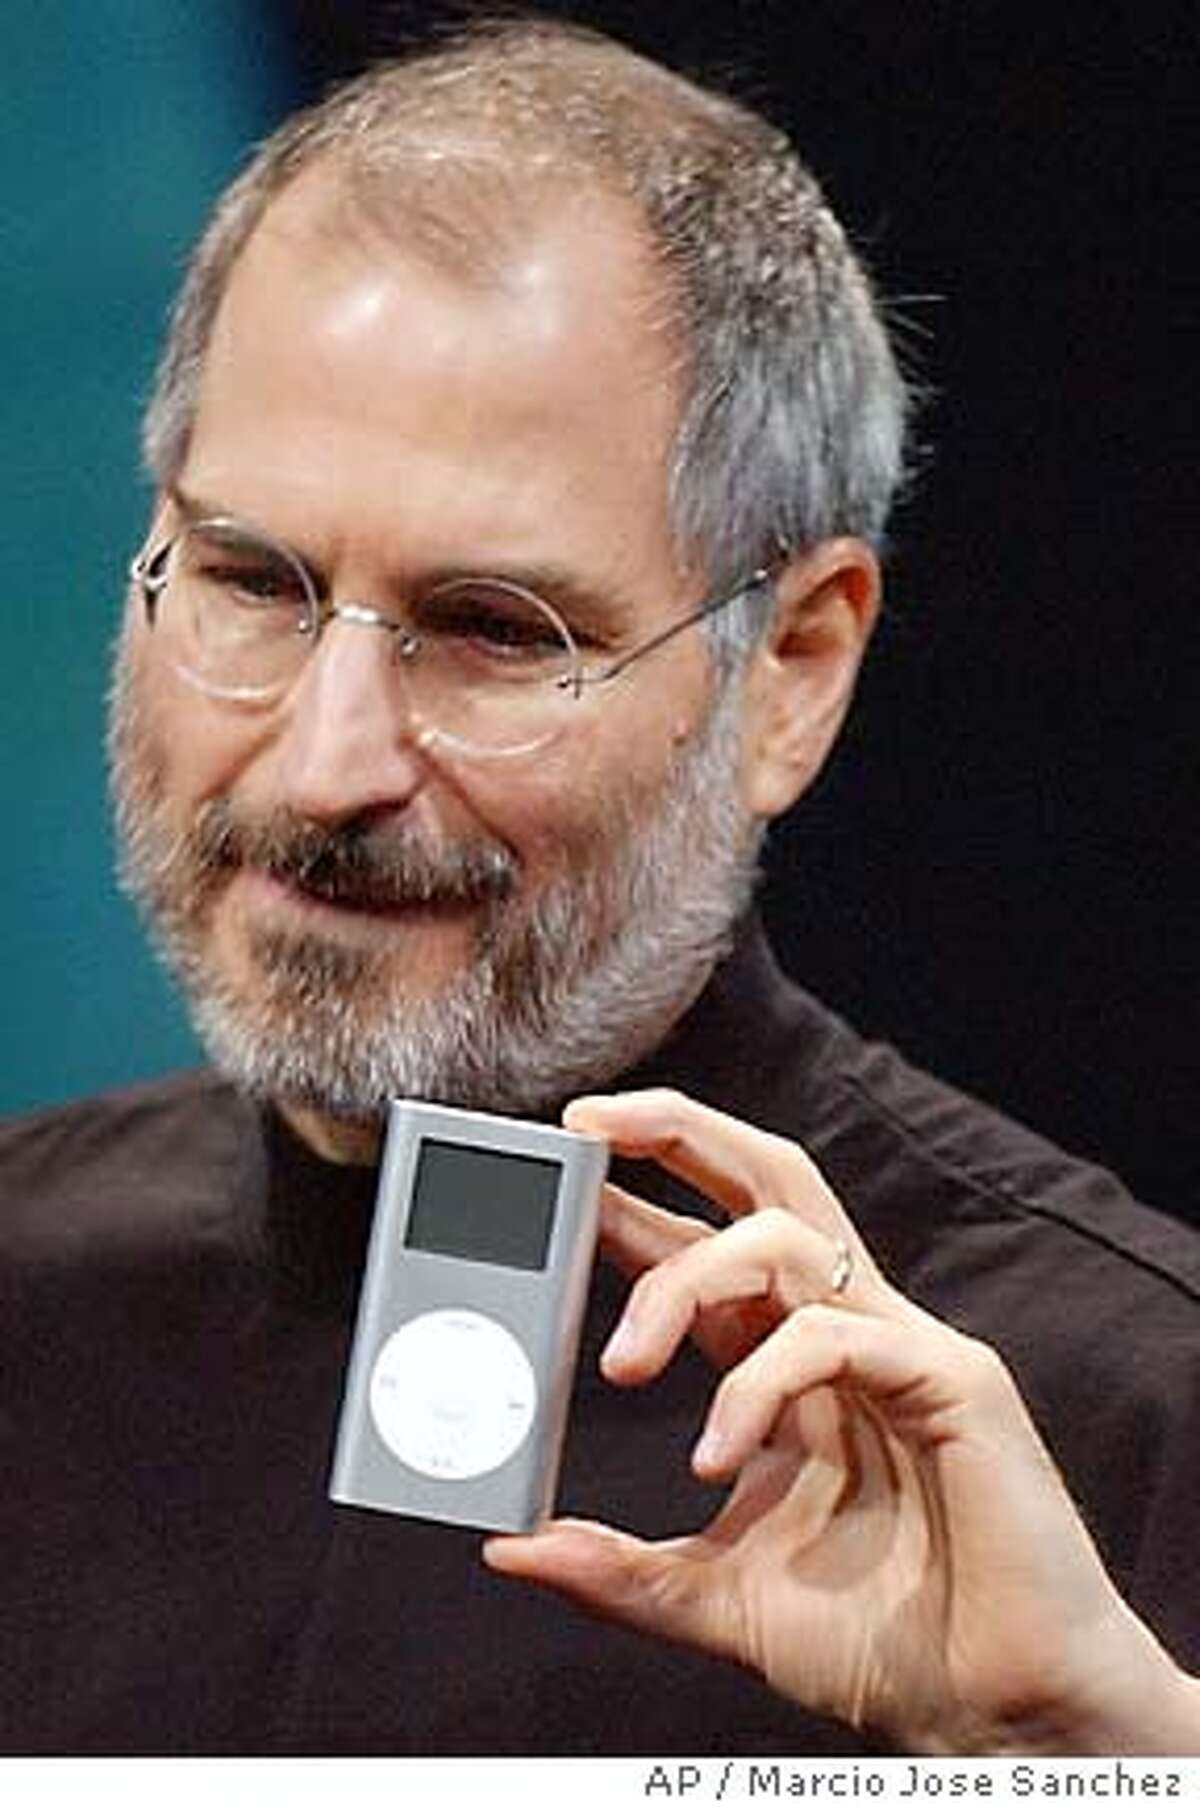 Apple CEO Steve Jobs displays his company's new product, the Mini-Ipod, at the Macworld Conference and Expo in San Francisco on Tuesday, Jan 6, 2004. Associated Press photo by Marcio Jose Sanchez